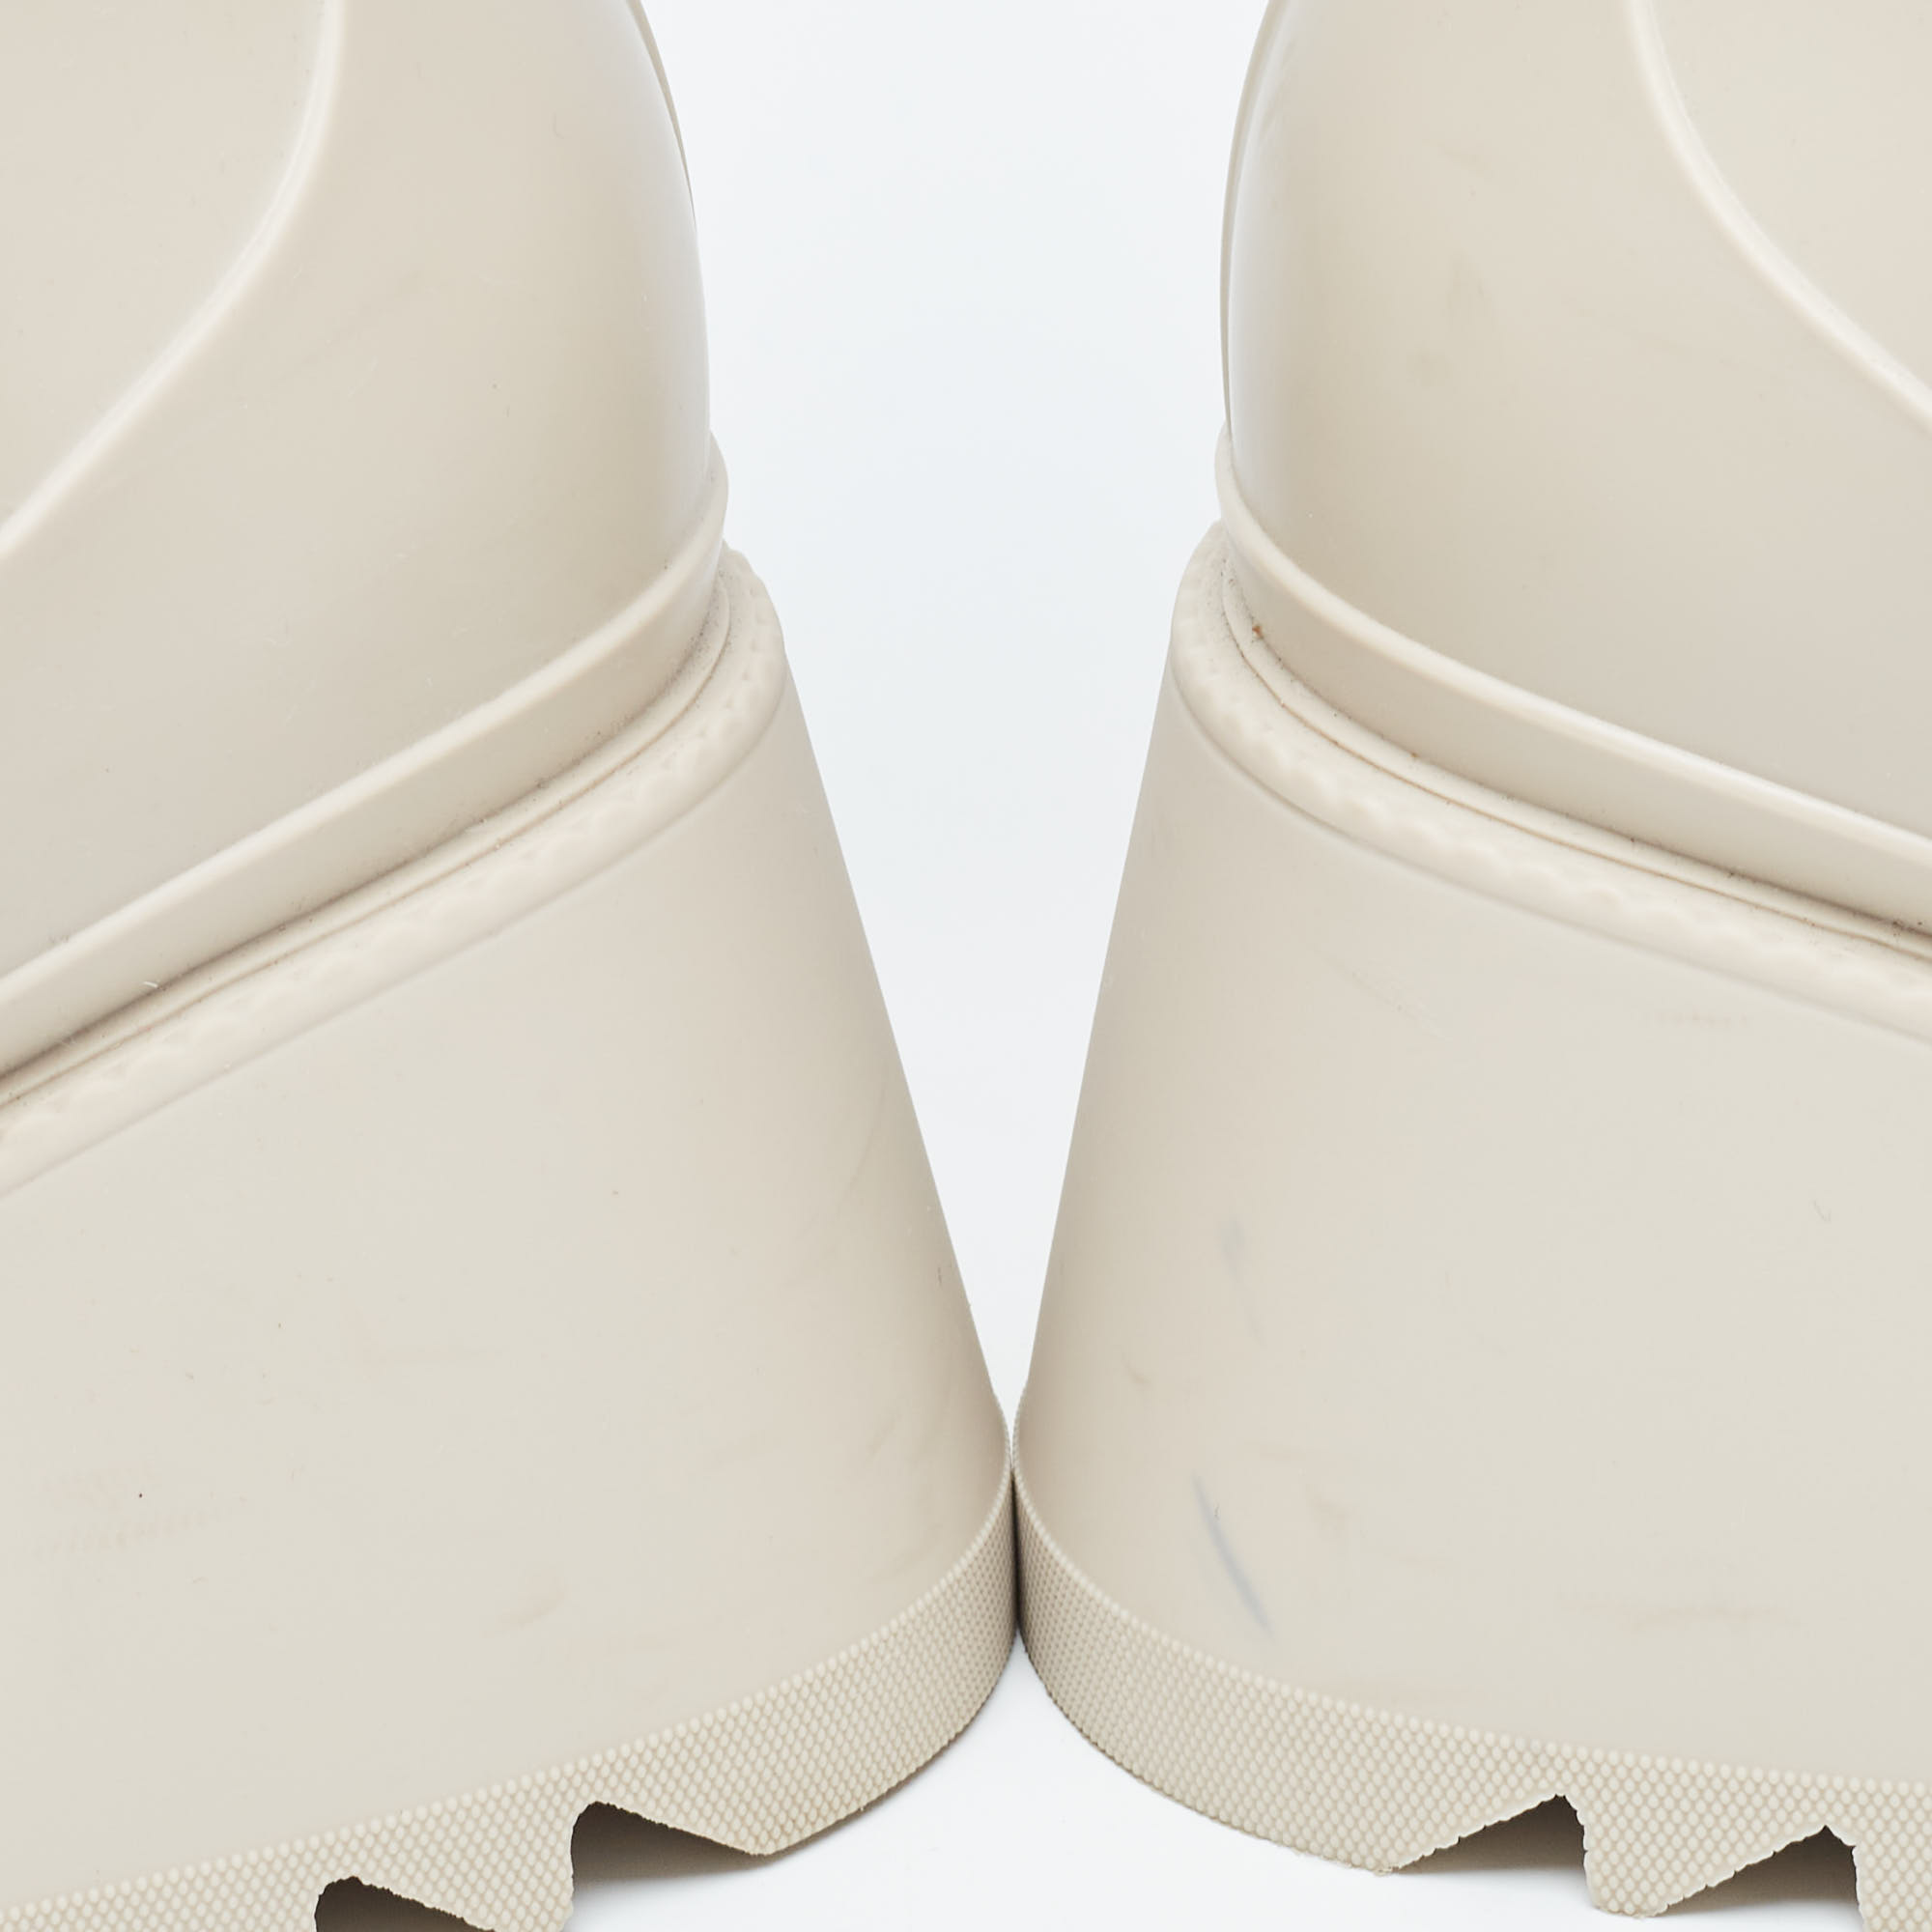 Chloé Cream Rubber Iuhnr Ankle Boots Size 36